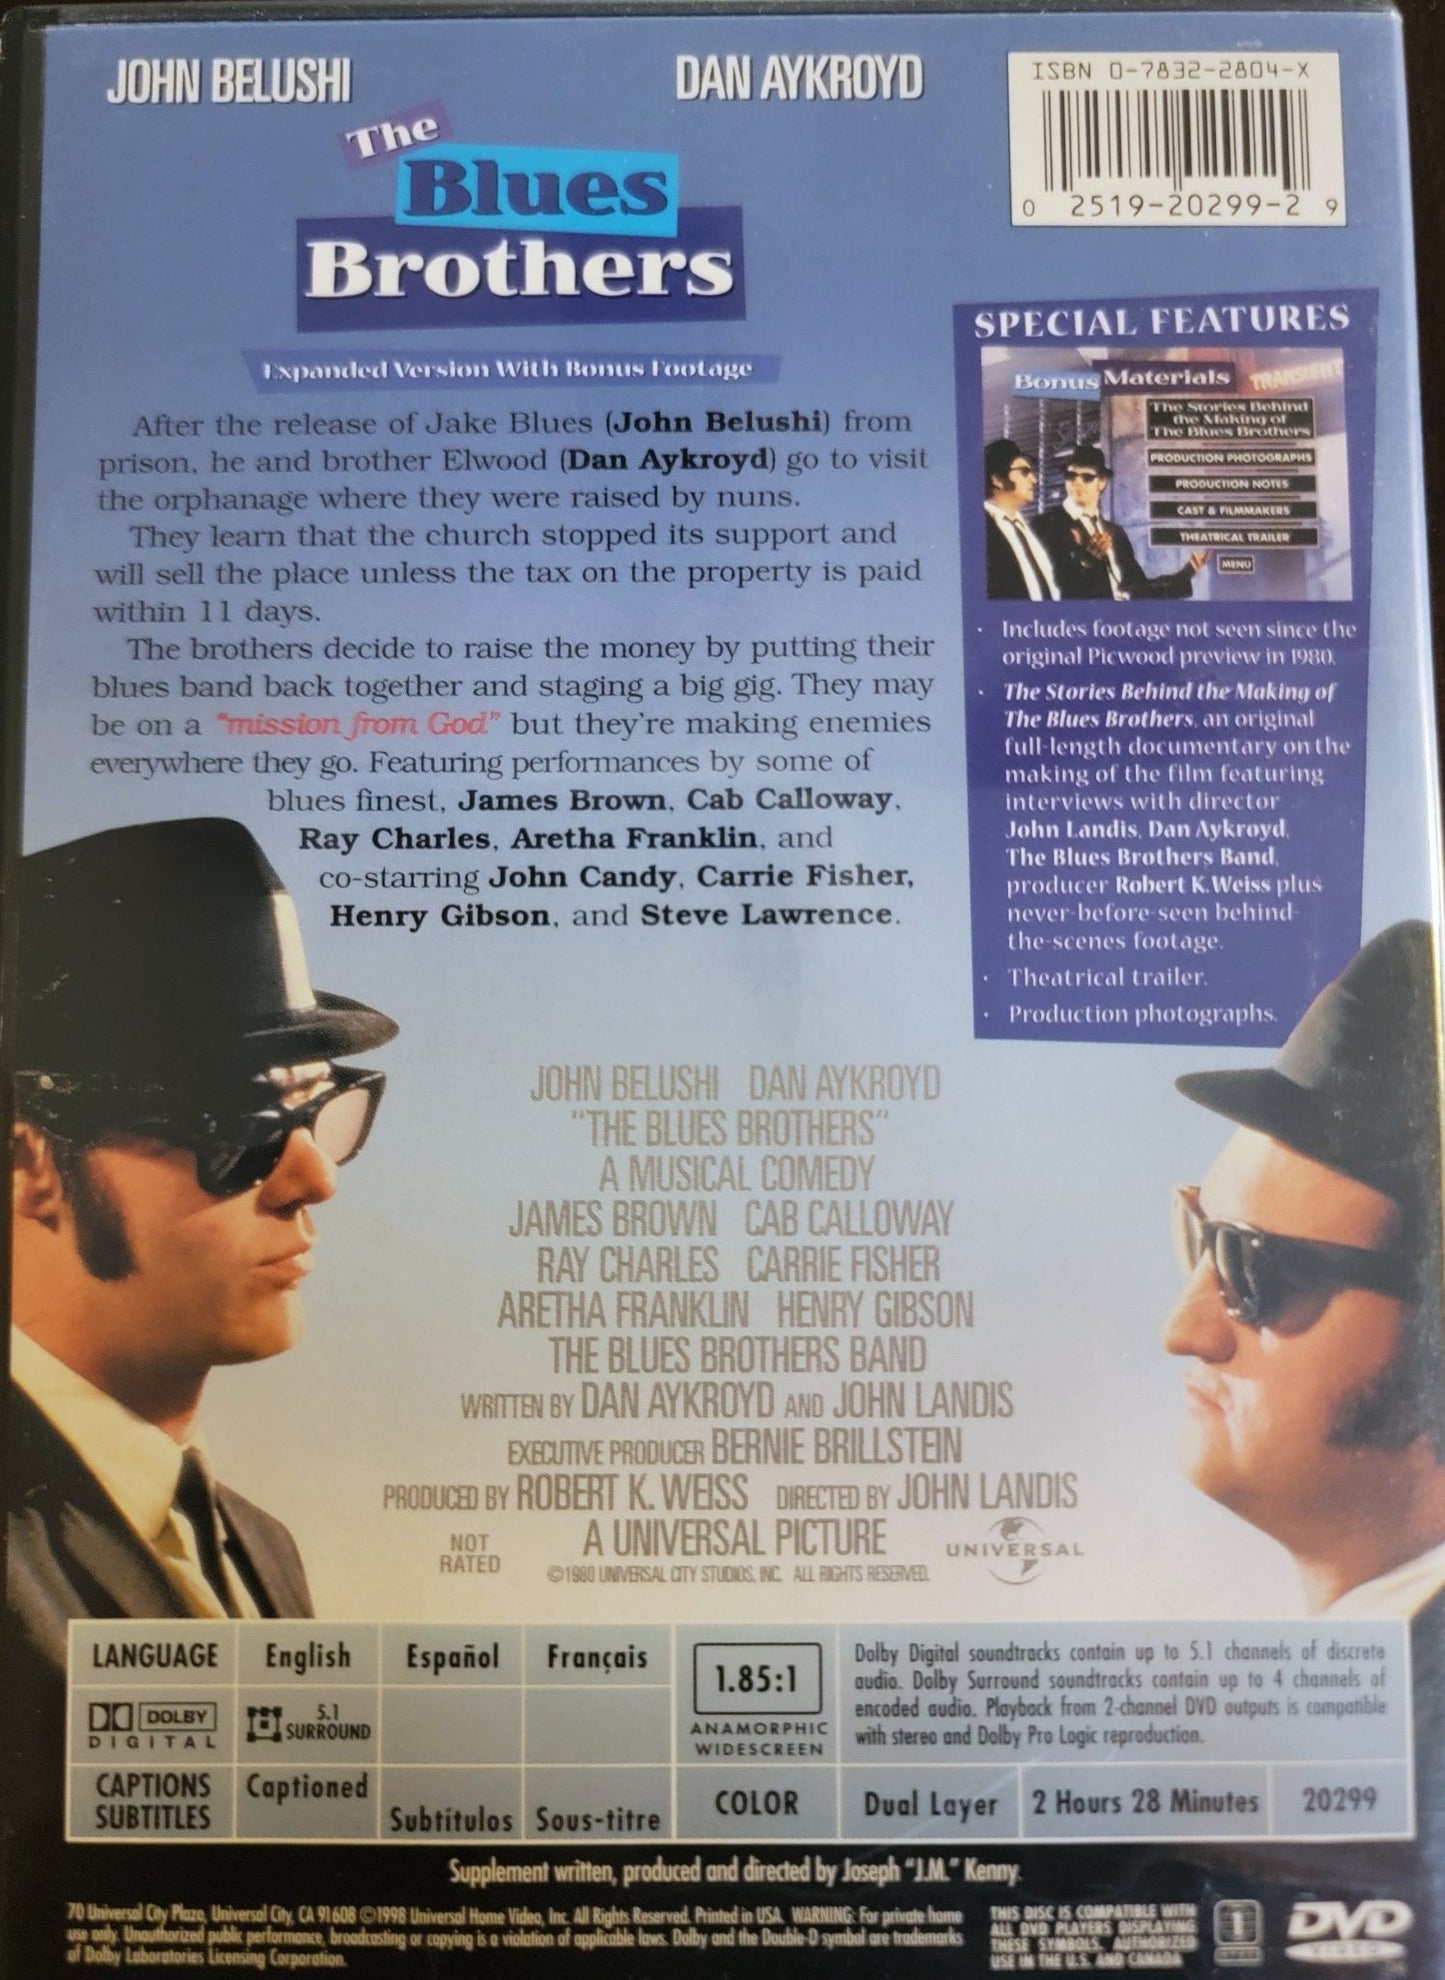 Universal Pictures Home Entertainment - The Blues Brothers | DVD | Collector's Edition Widescreen - DVD - Steady Bunny Shop